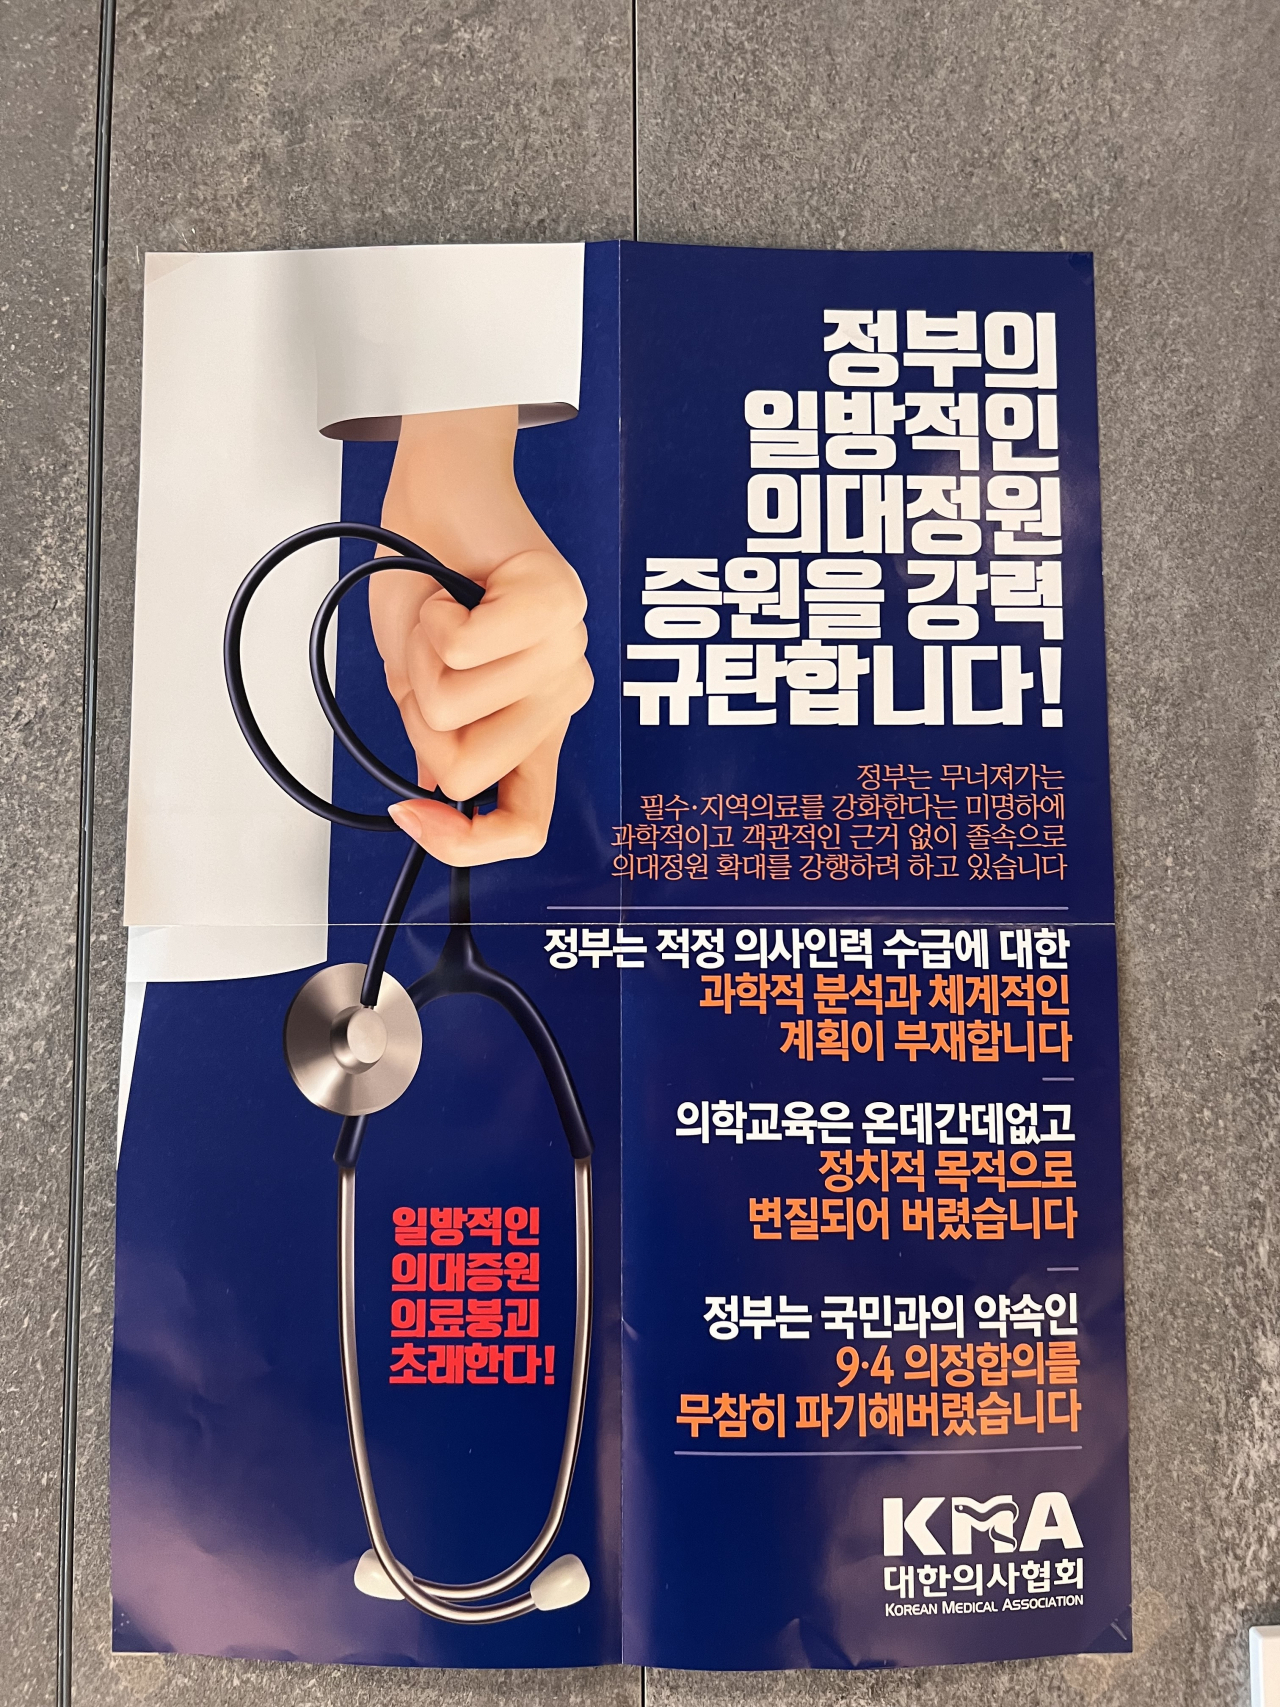 A poster that condemns the South Korean government’s decision to increase the medical school admissions quota is posted on the wall at the Korean Medical Association’s headquarters. (Park Jun-hee/The Korea Herald)